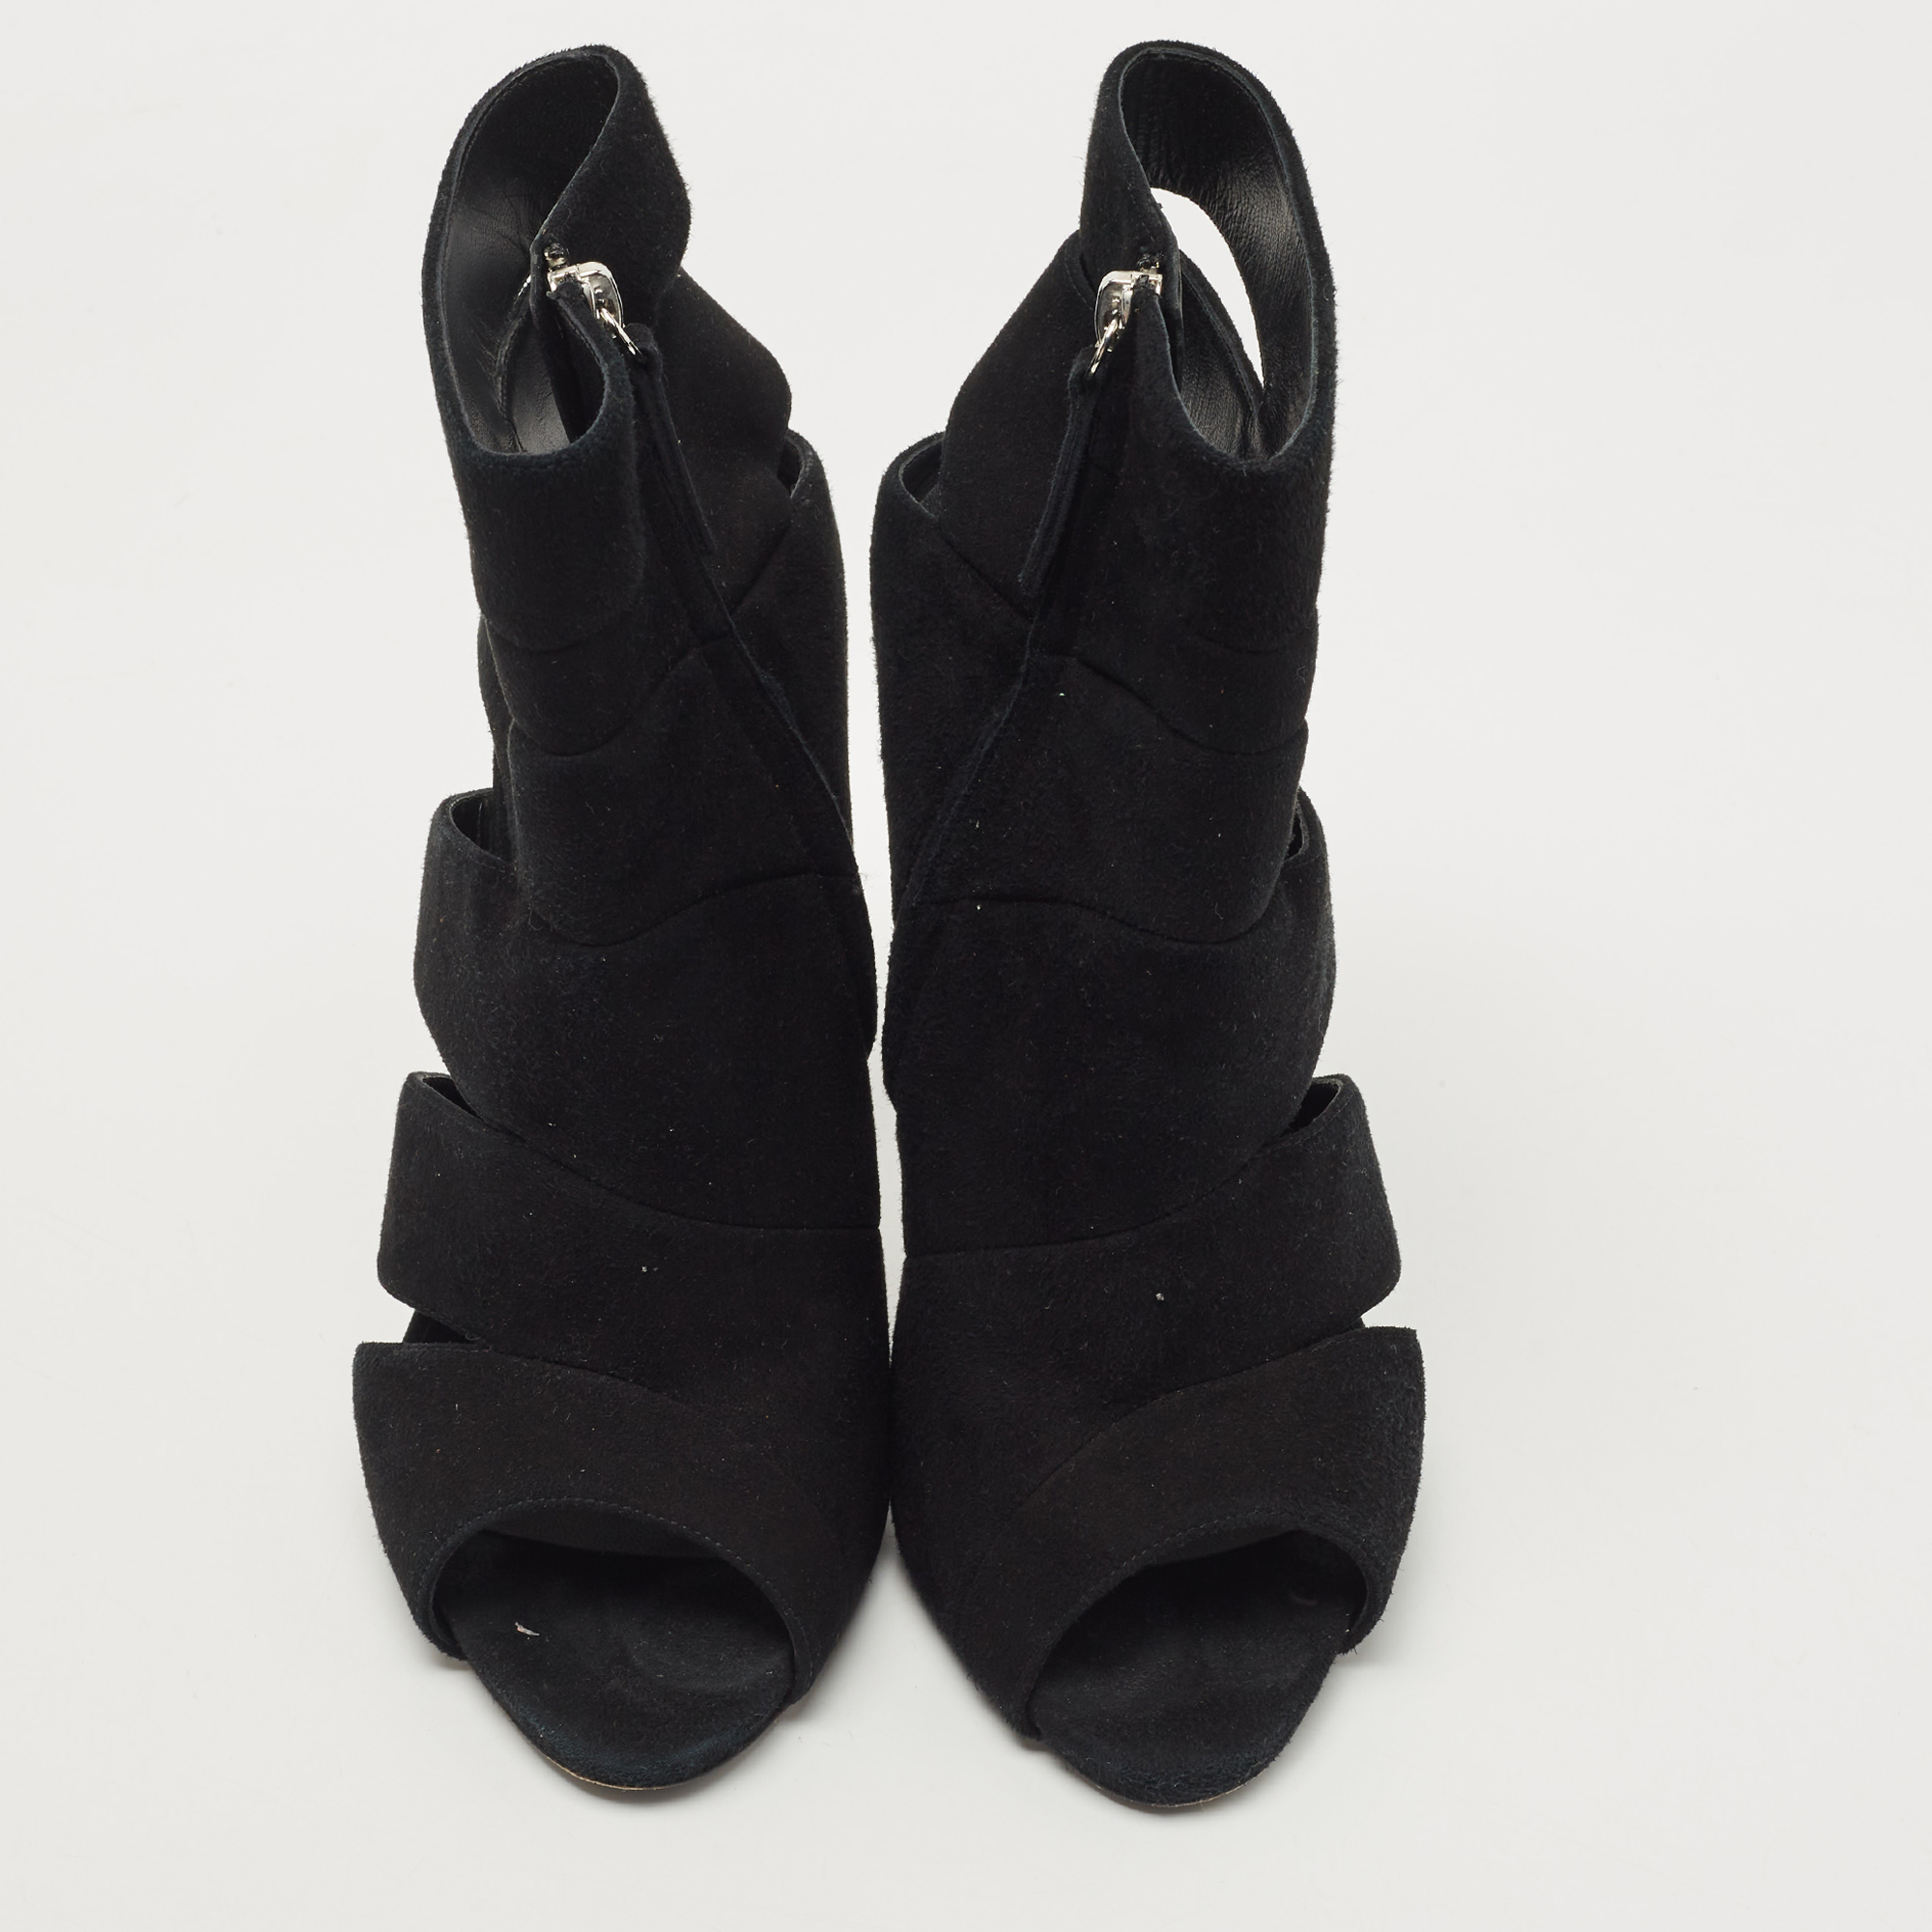 Giuseppe Zanotti Black Suede Cut Out Peep Toe Ankle Booties Size 39